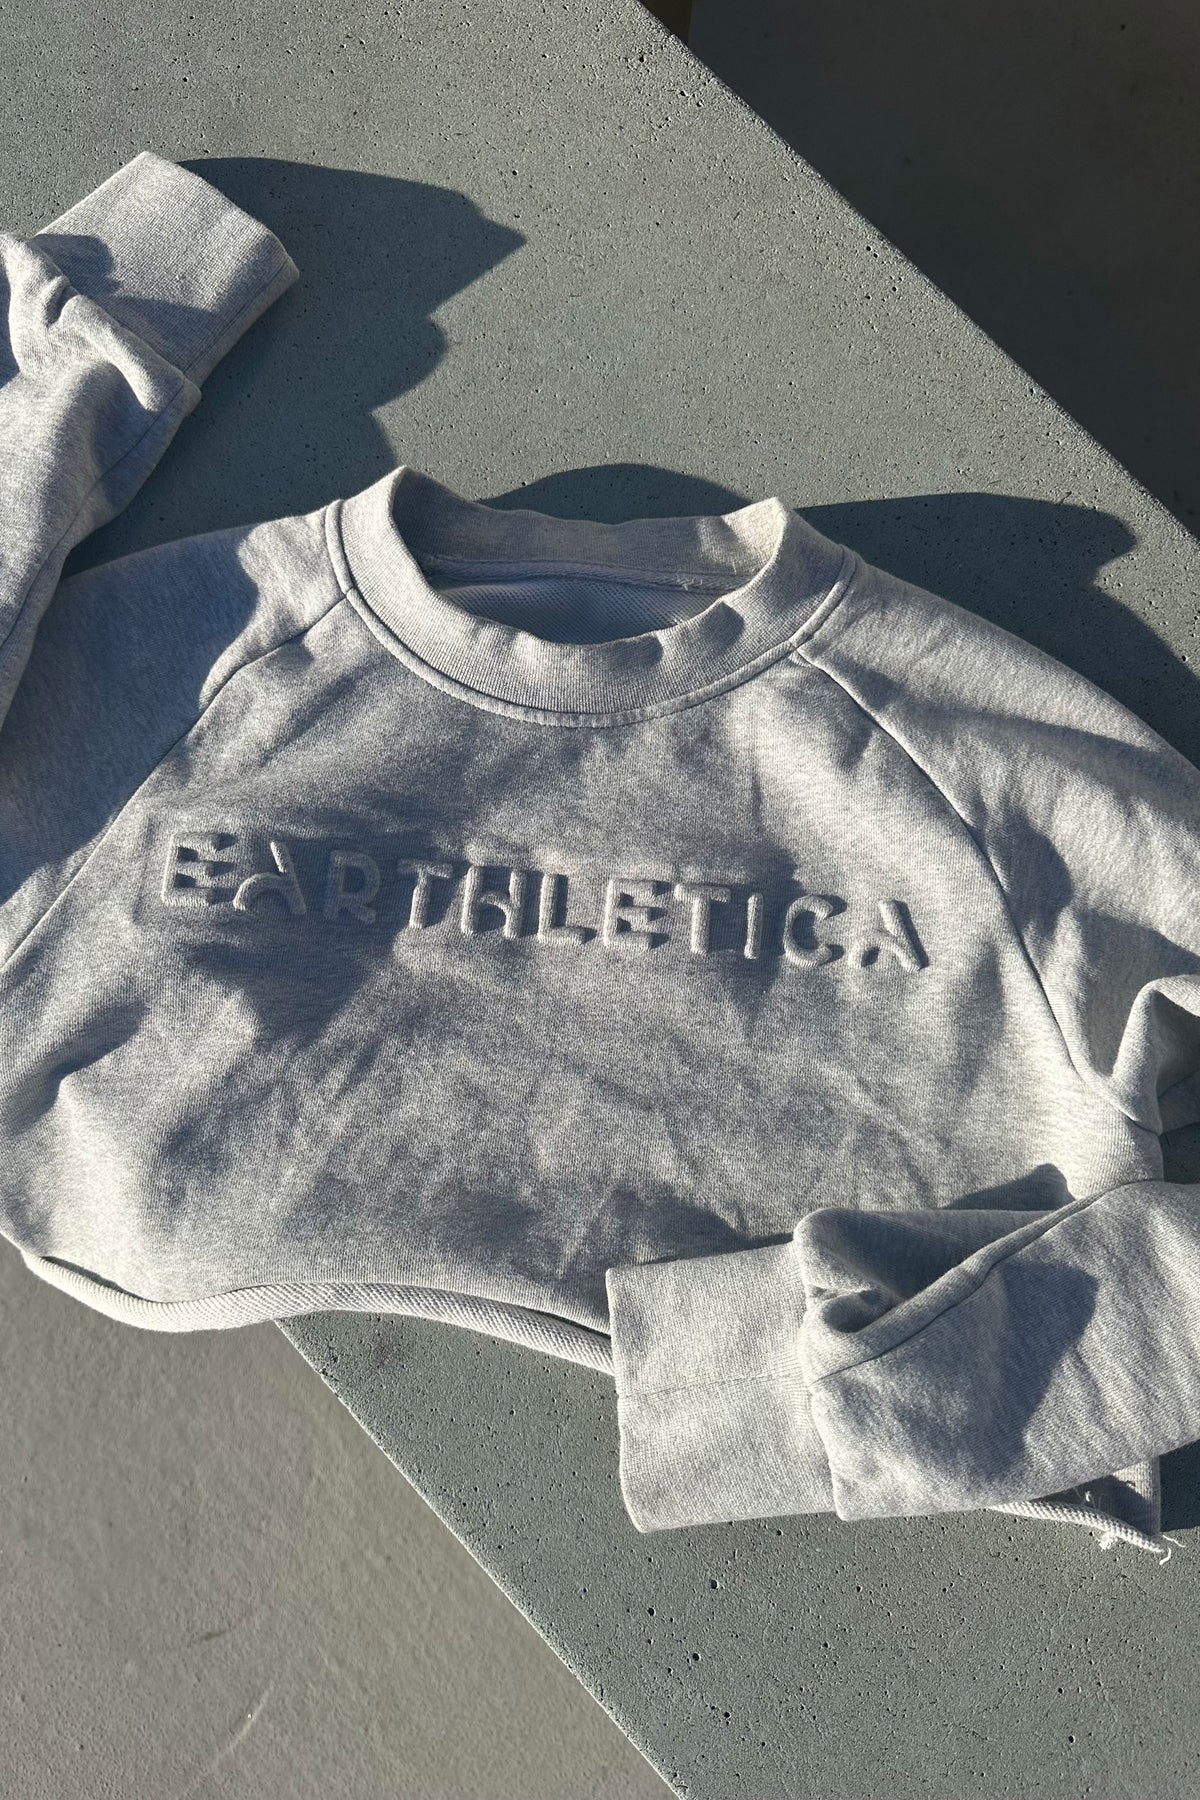 The Streetwise Sweater on a slab of marble